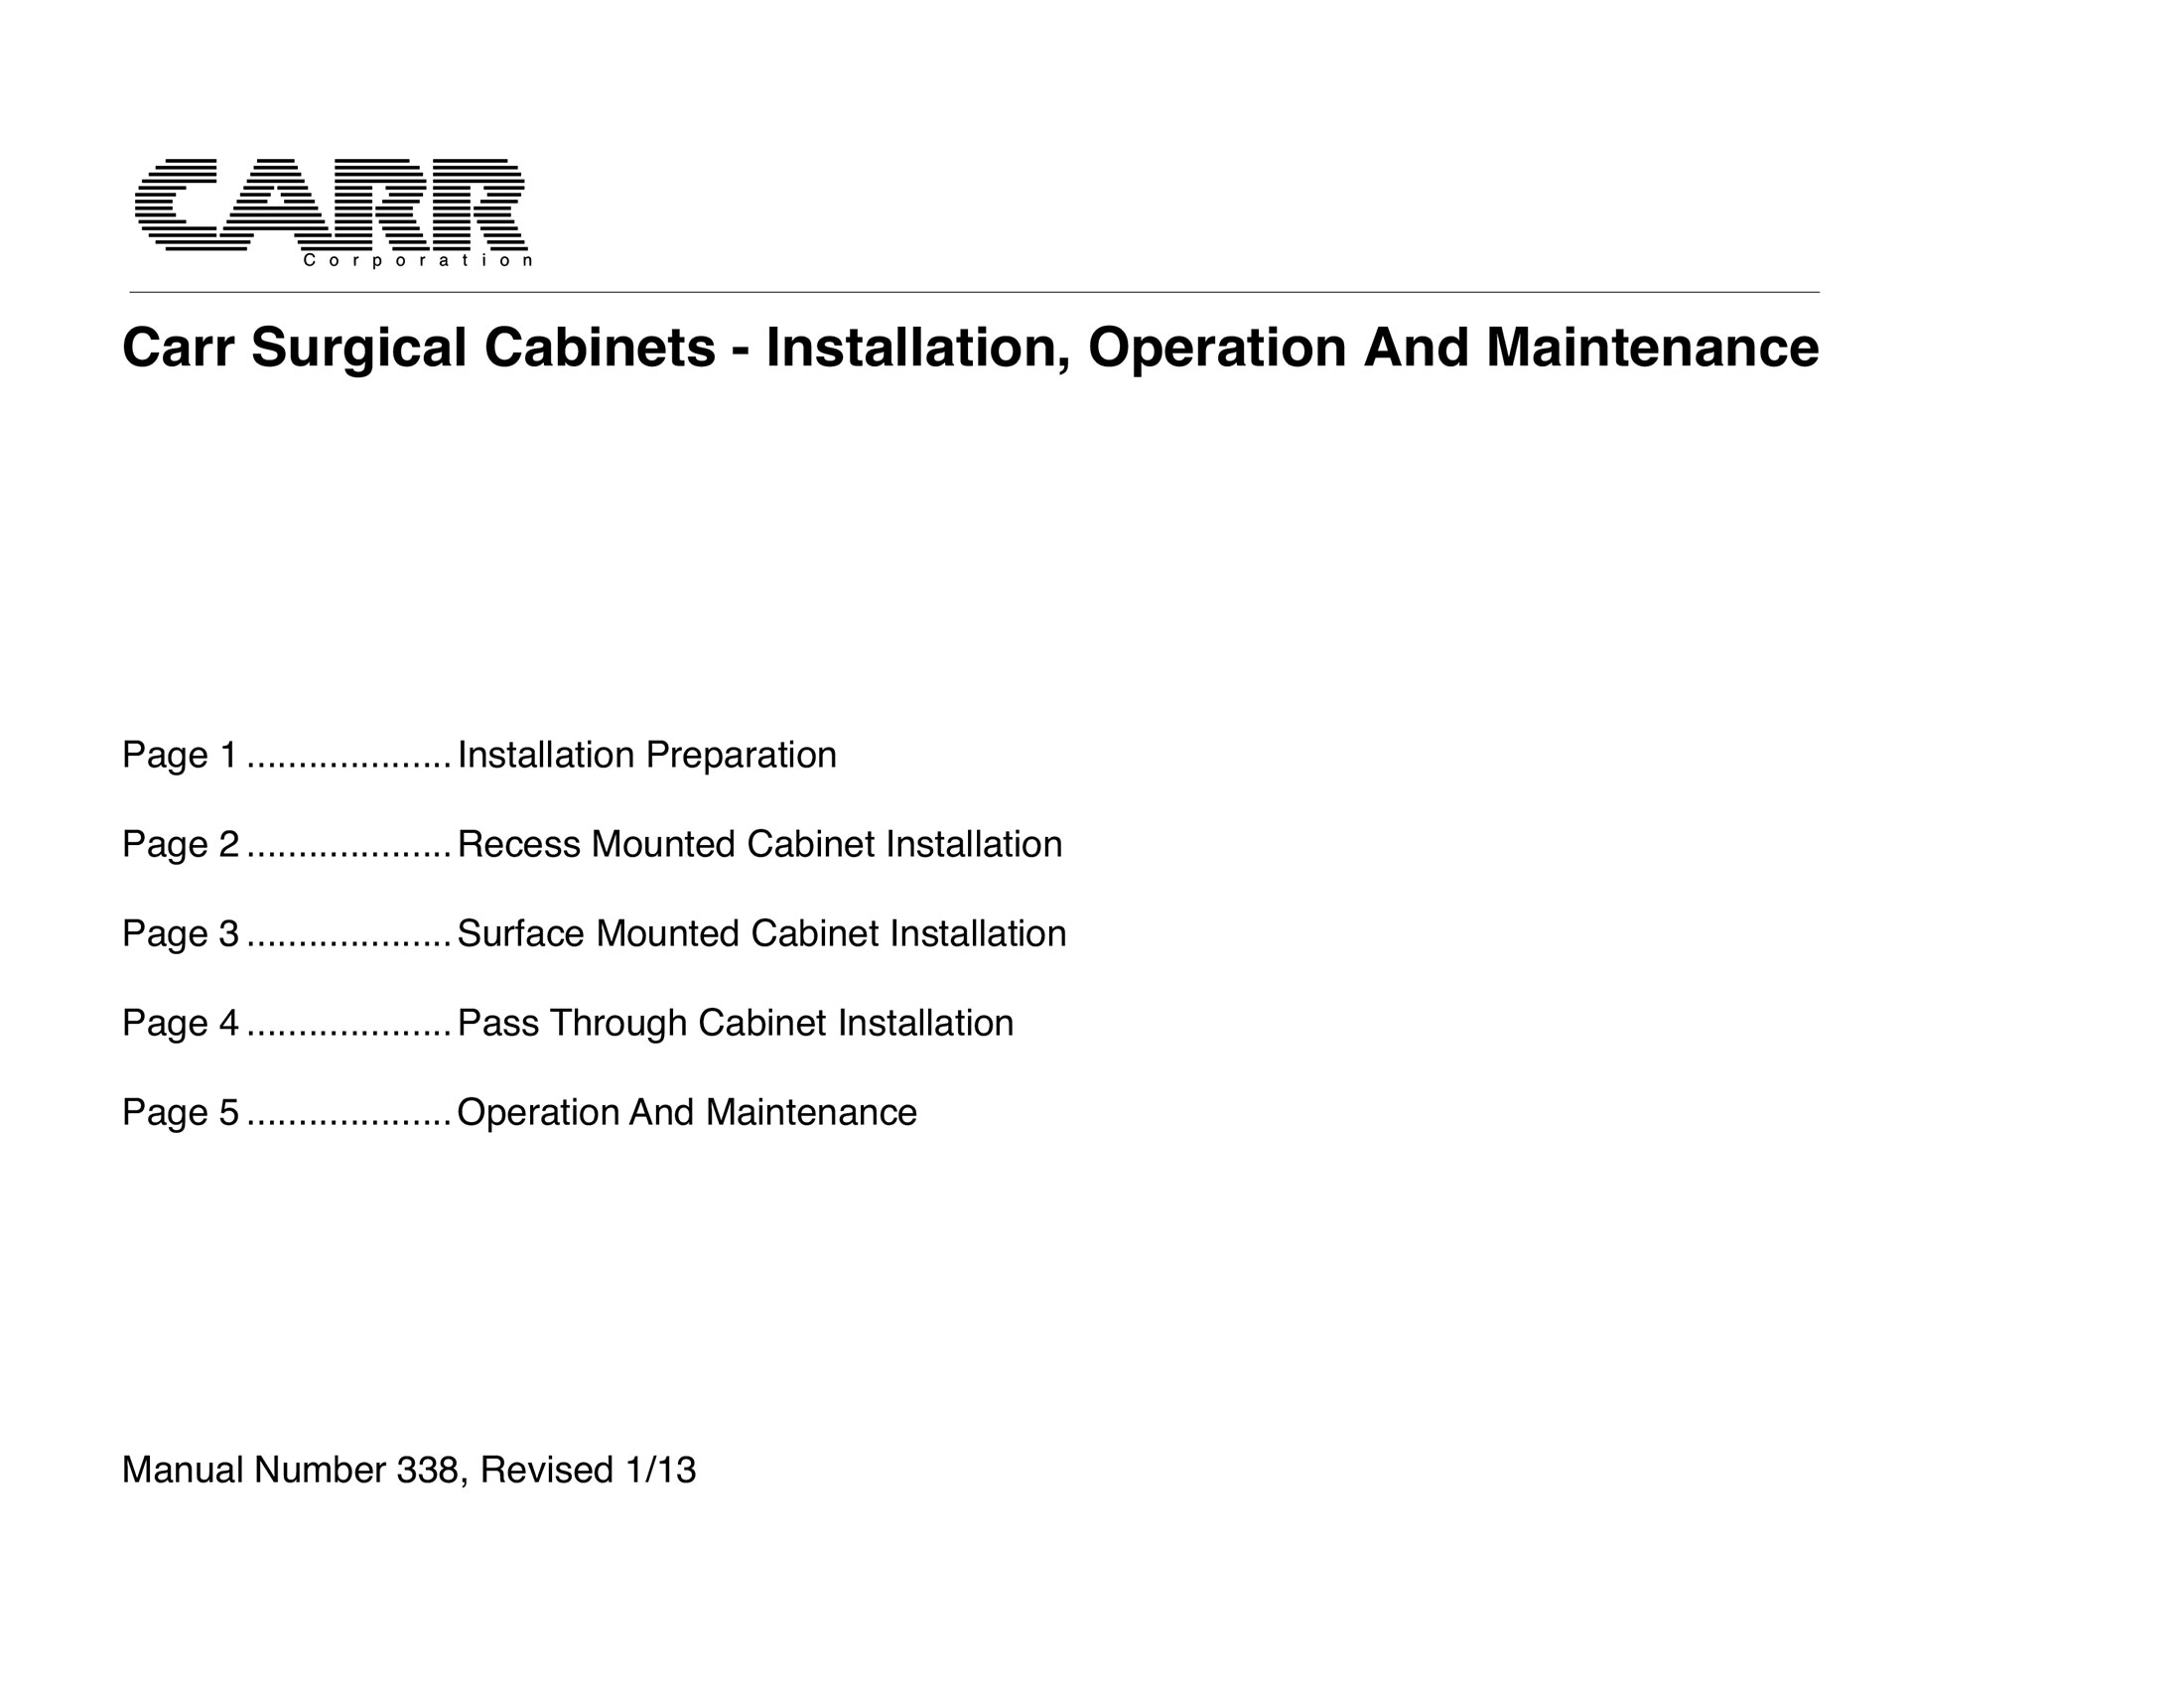 SSC: SURGICAL STORAGE CABINETS